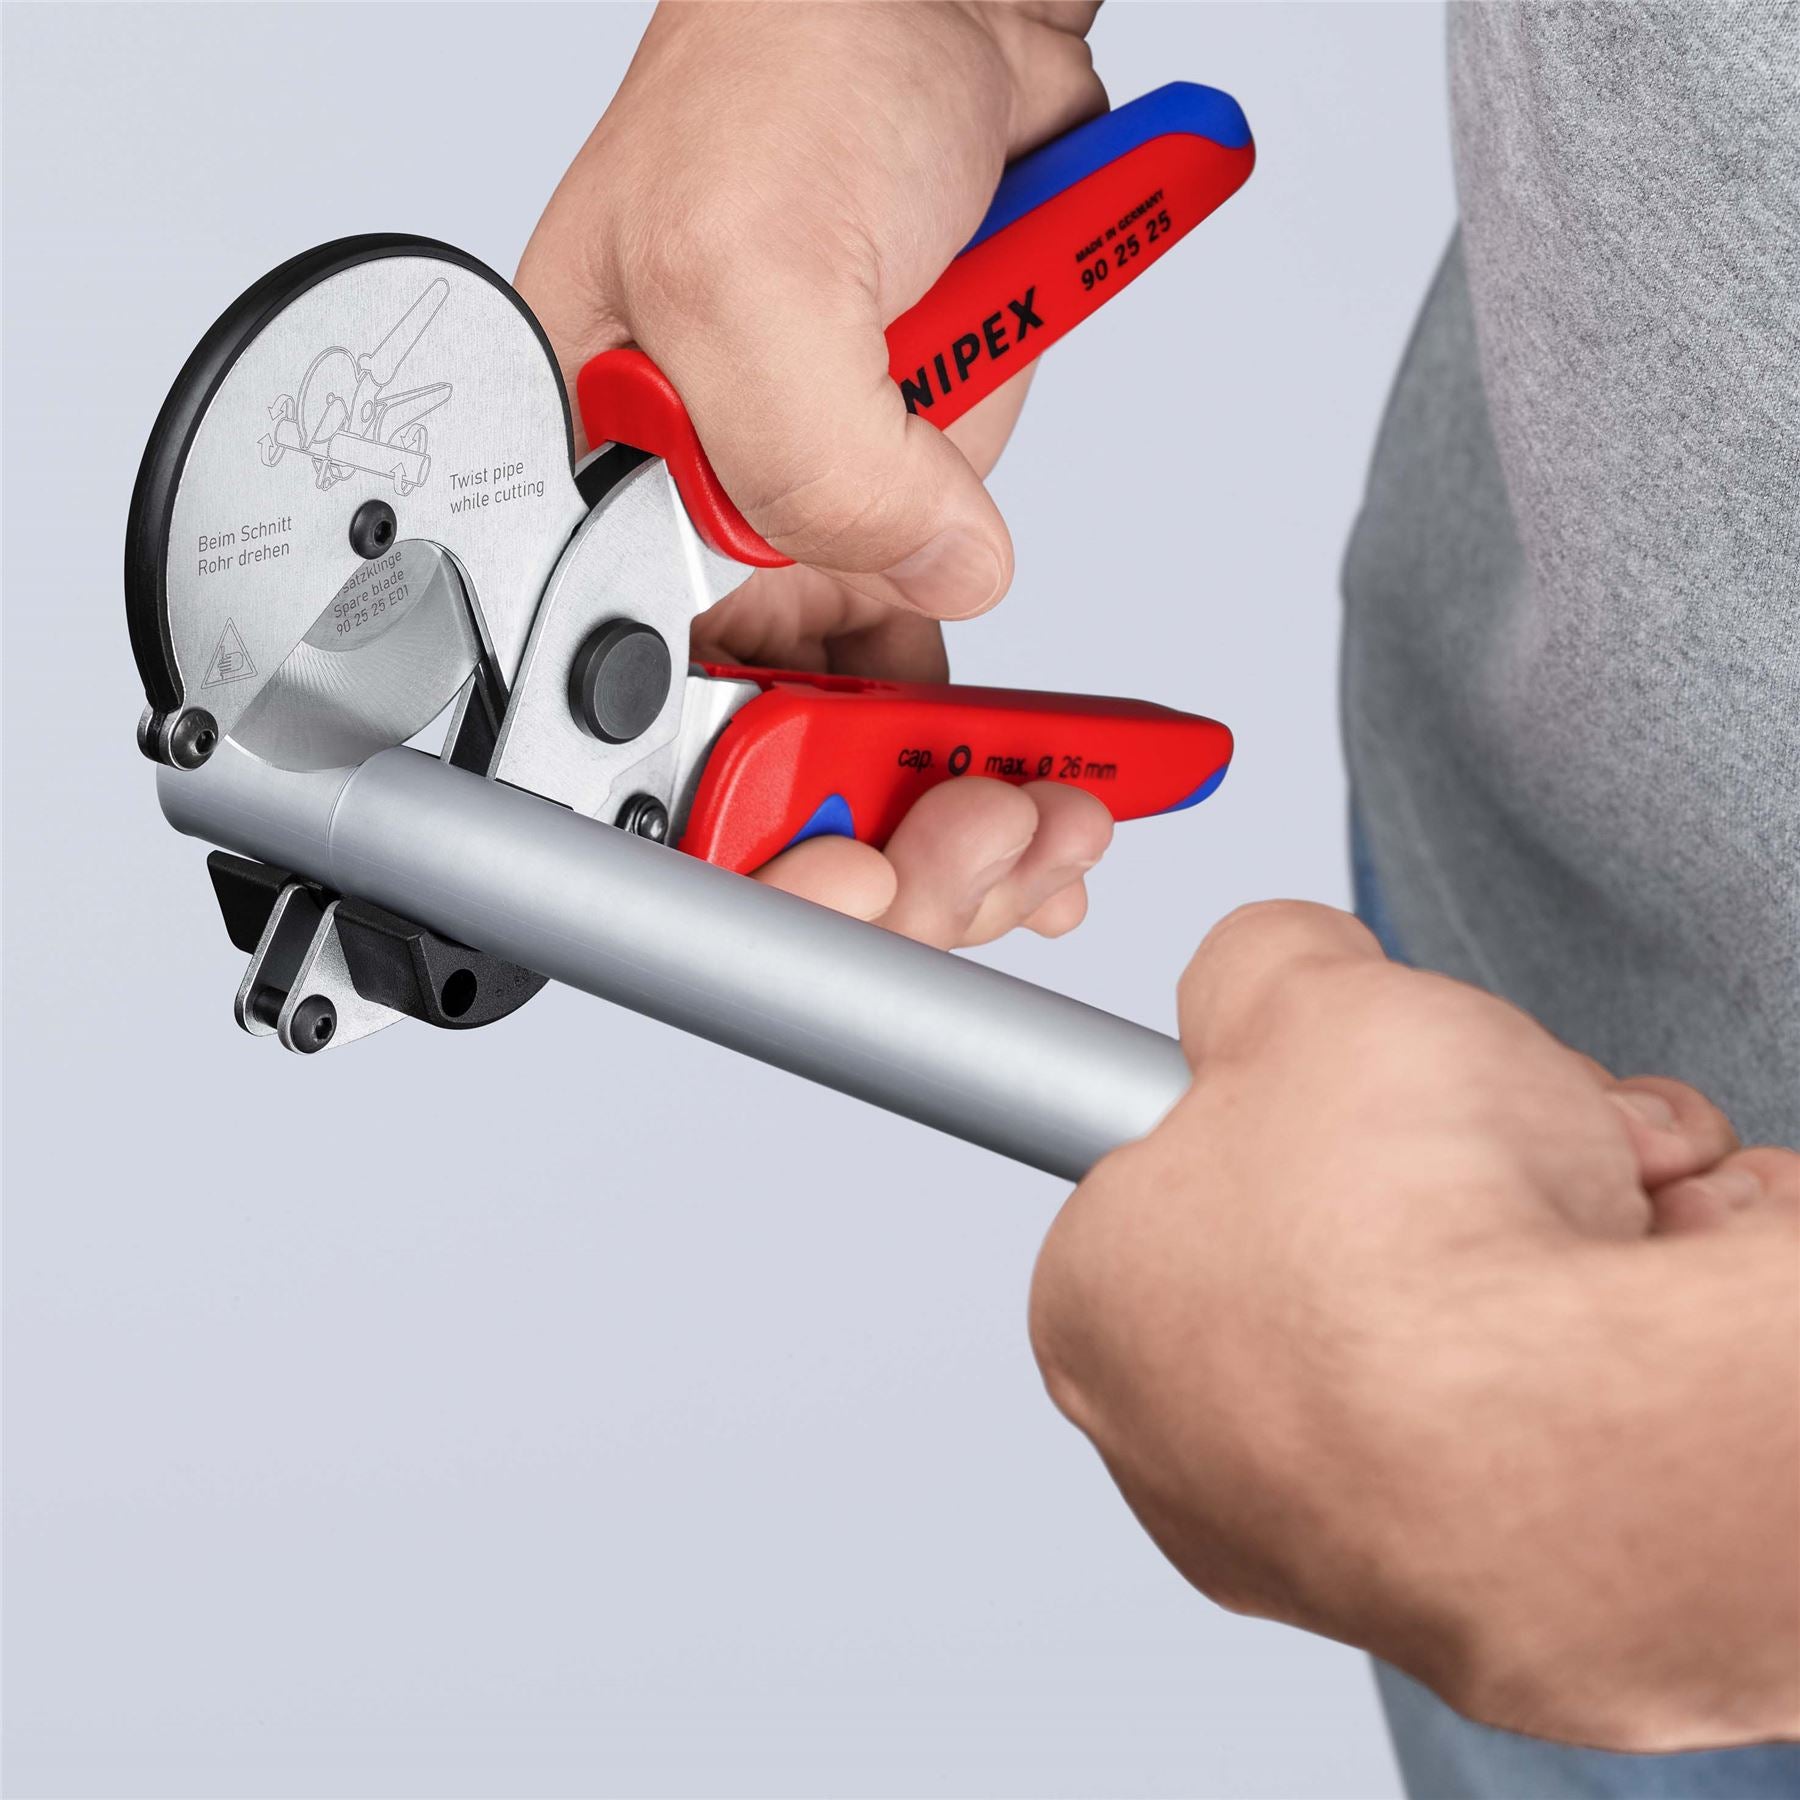 Knipex Pipe Cutter for Composite and Plastic Pipes 26mm Capactiy Multi Component Grips 90 25 25